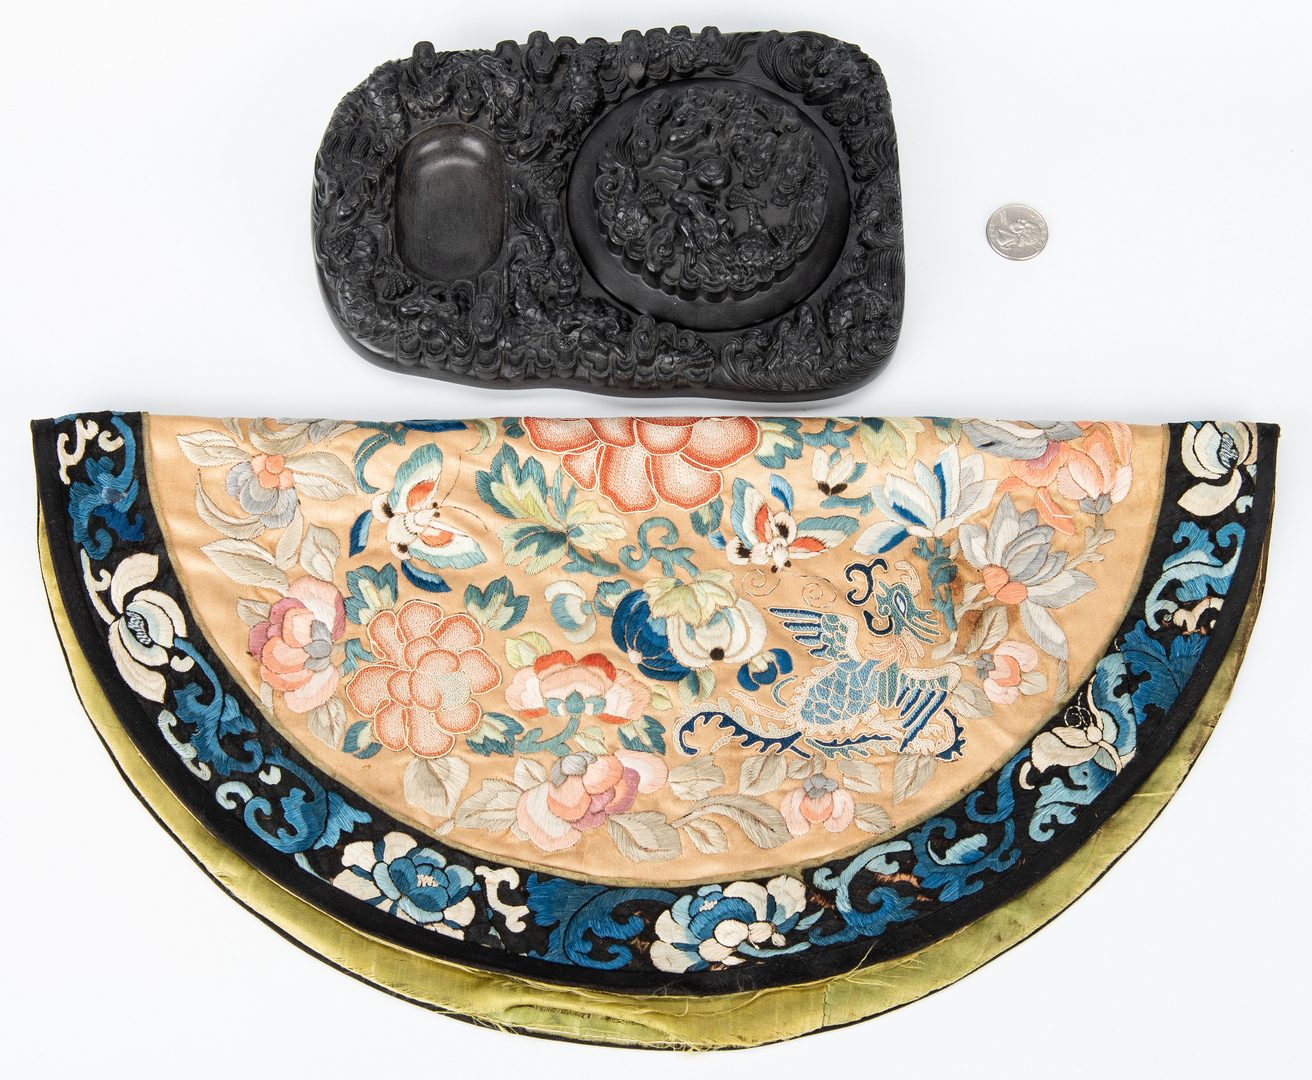 Lot 171: Chinese Carved Inkstone & Silk Embroidery, 2 items